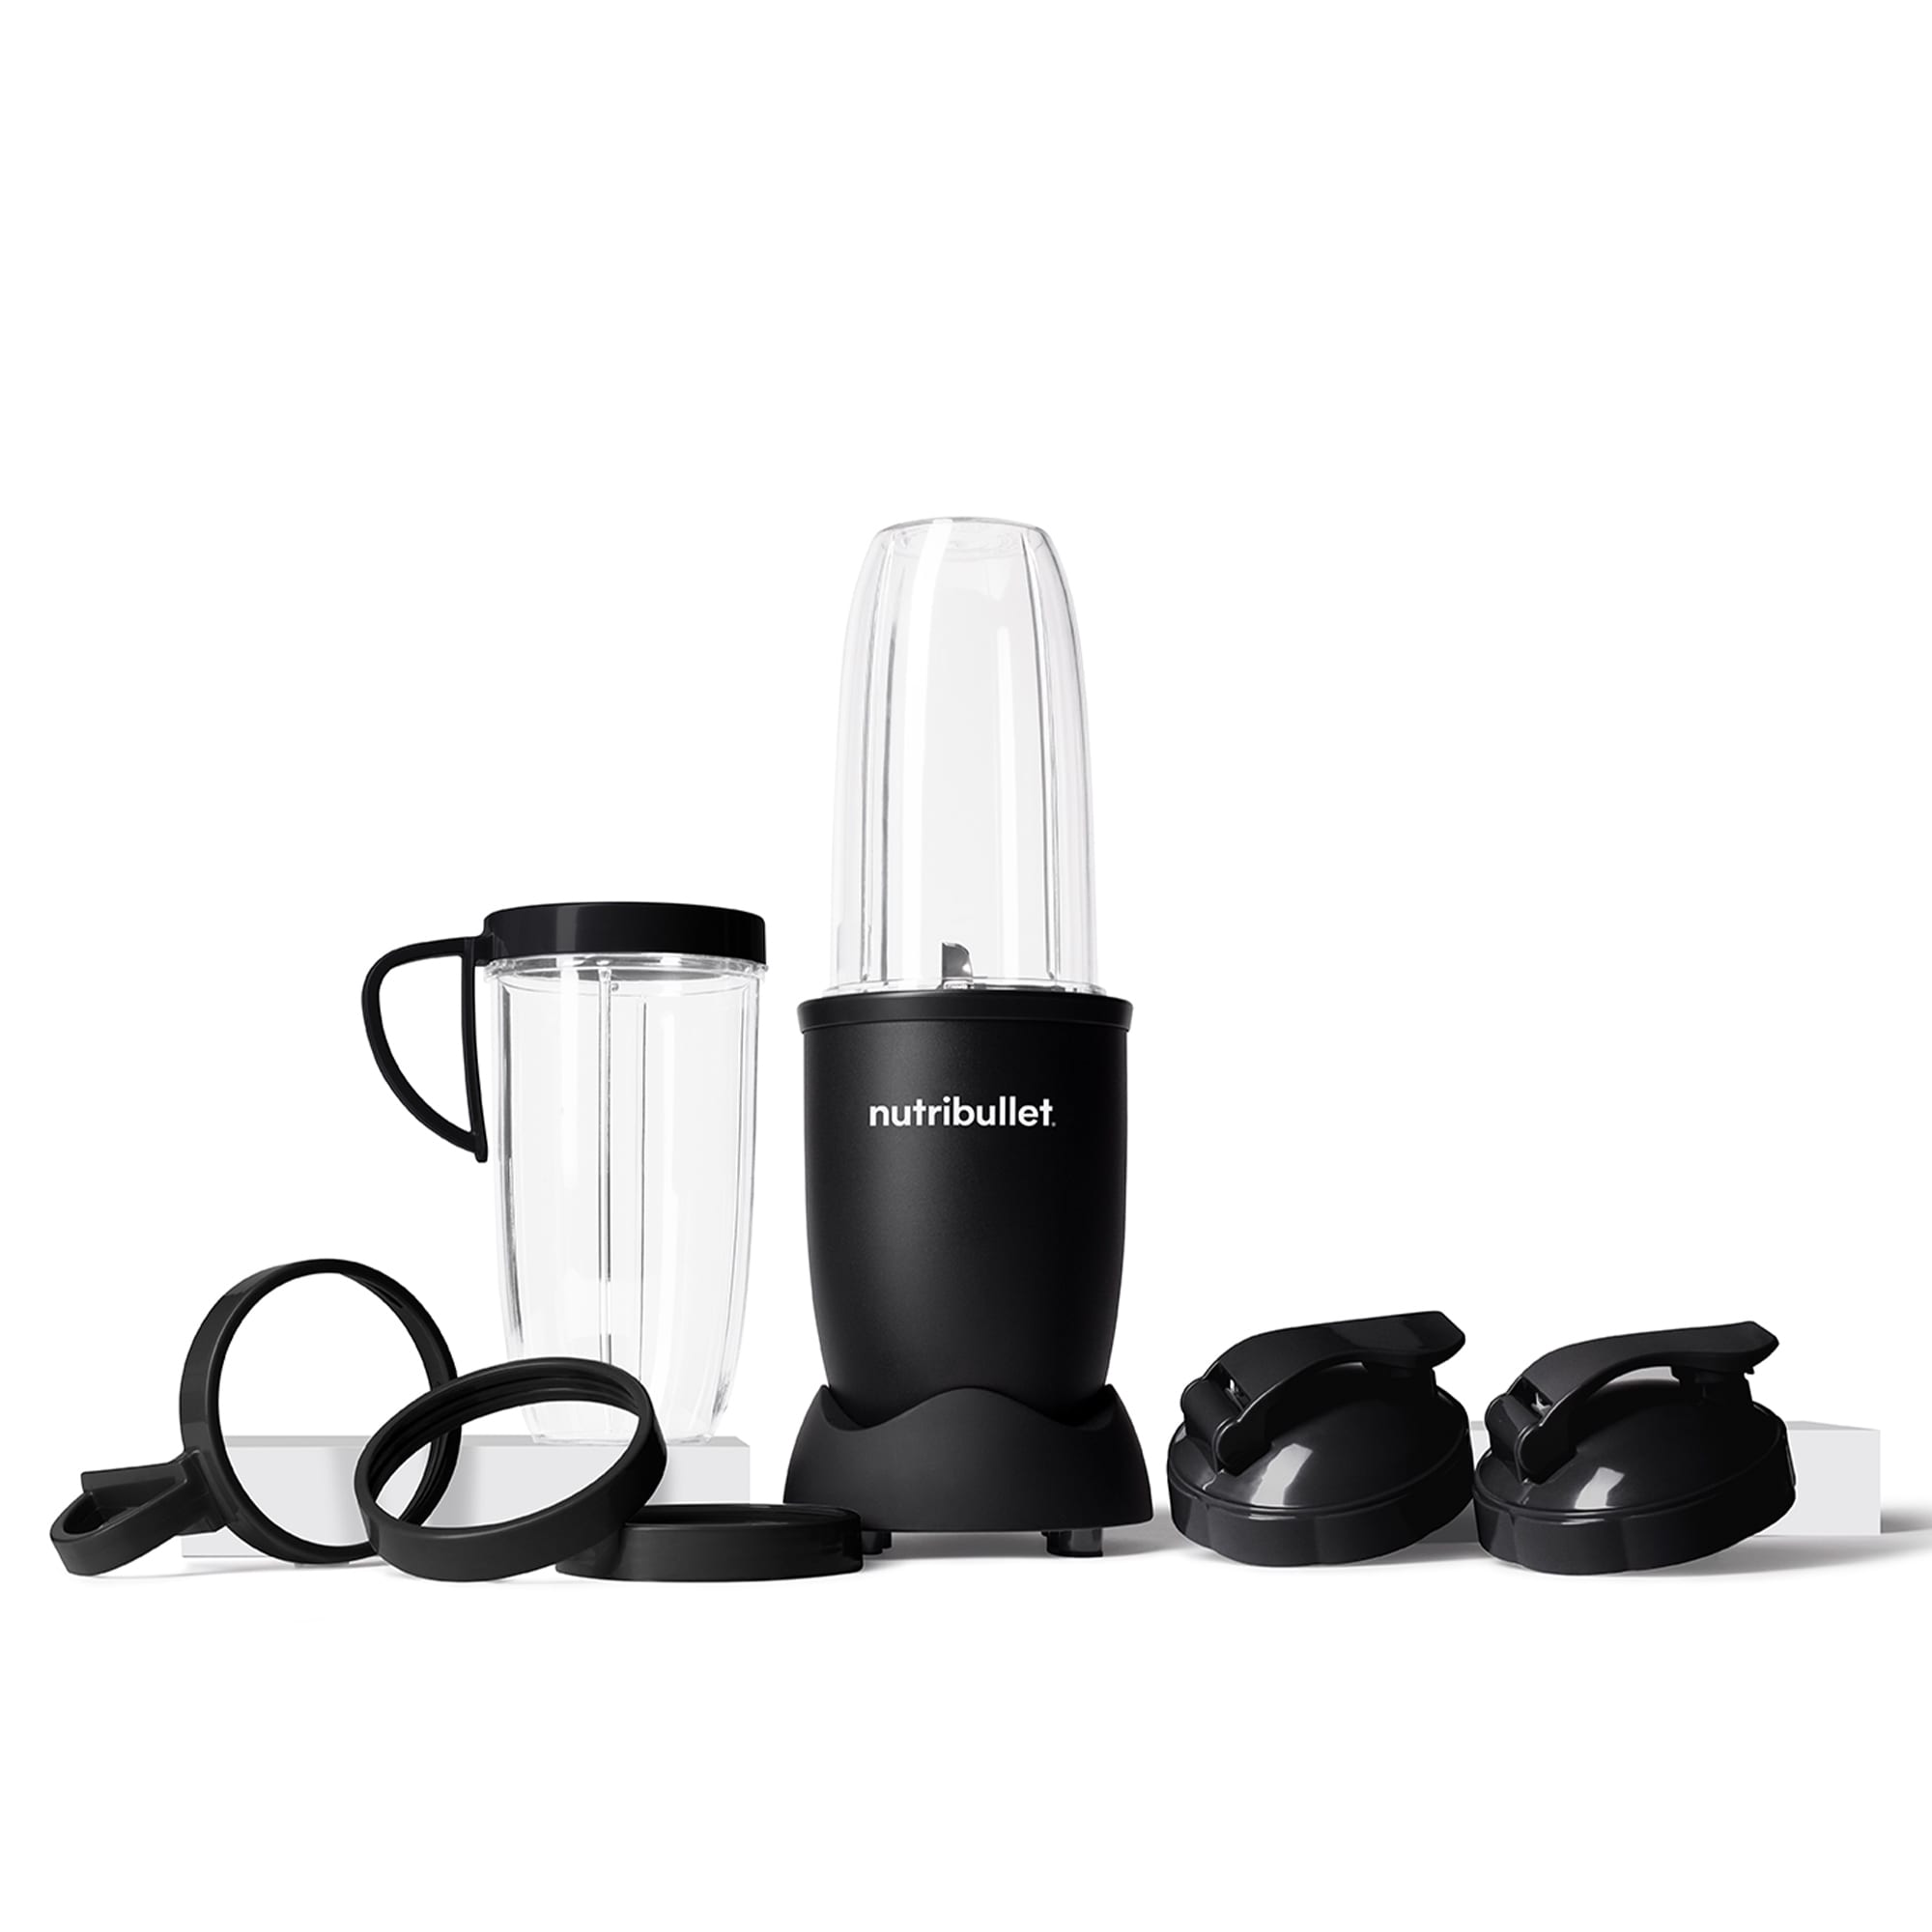 https://ak1.ostkcdn.com/images/products/is/images/direct/ae1660c0b416d72065631a9c77397e49f314e350/nutribullet-NB91301AW-Single-Serve-Blender.jpg